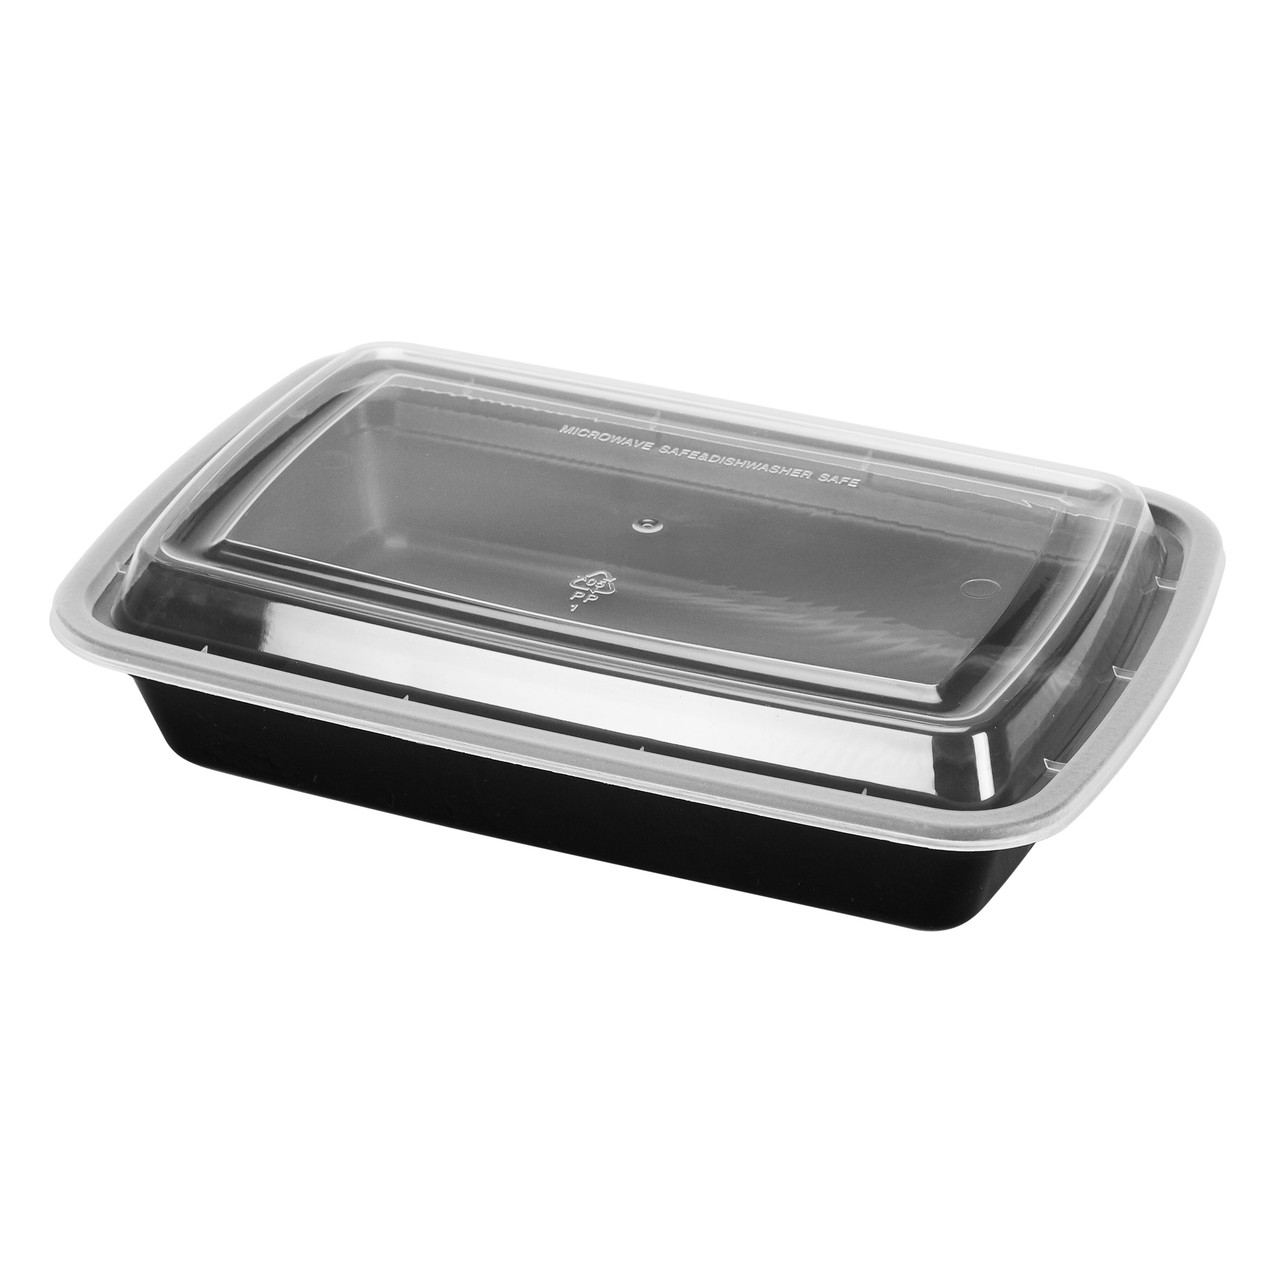 Blaze Hot Food Packaging 18 oz Microwave Safe Container & Lid Combo Pack (IMRCT28CMB150)